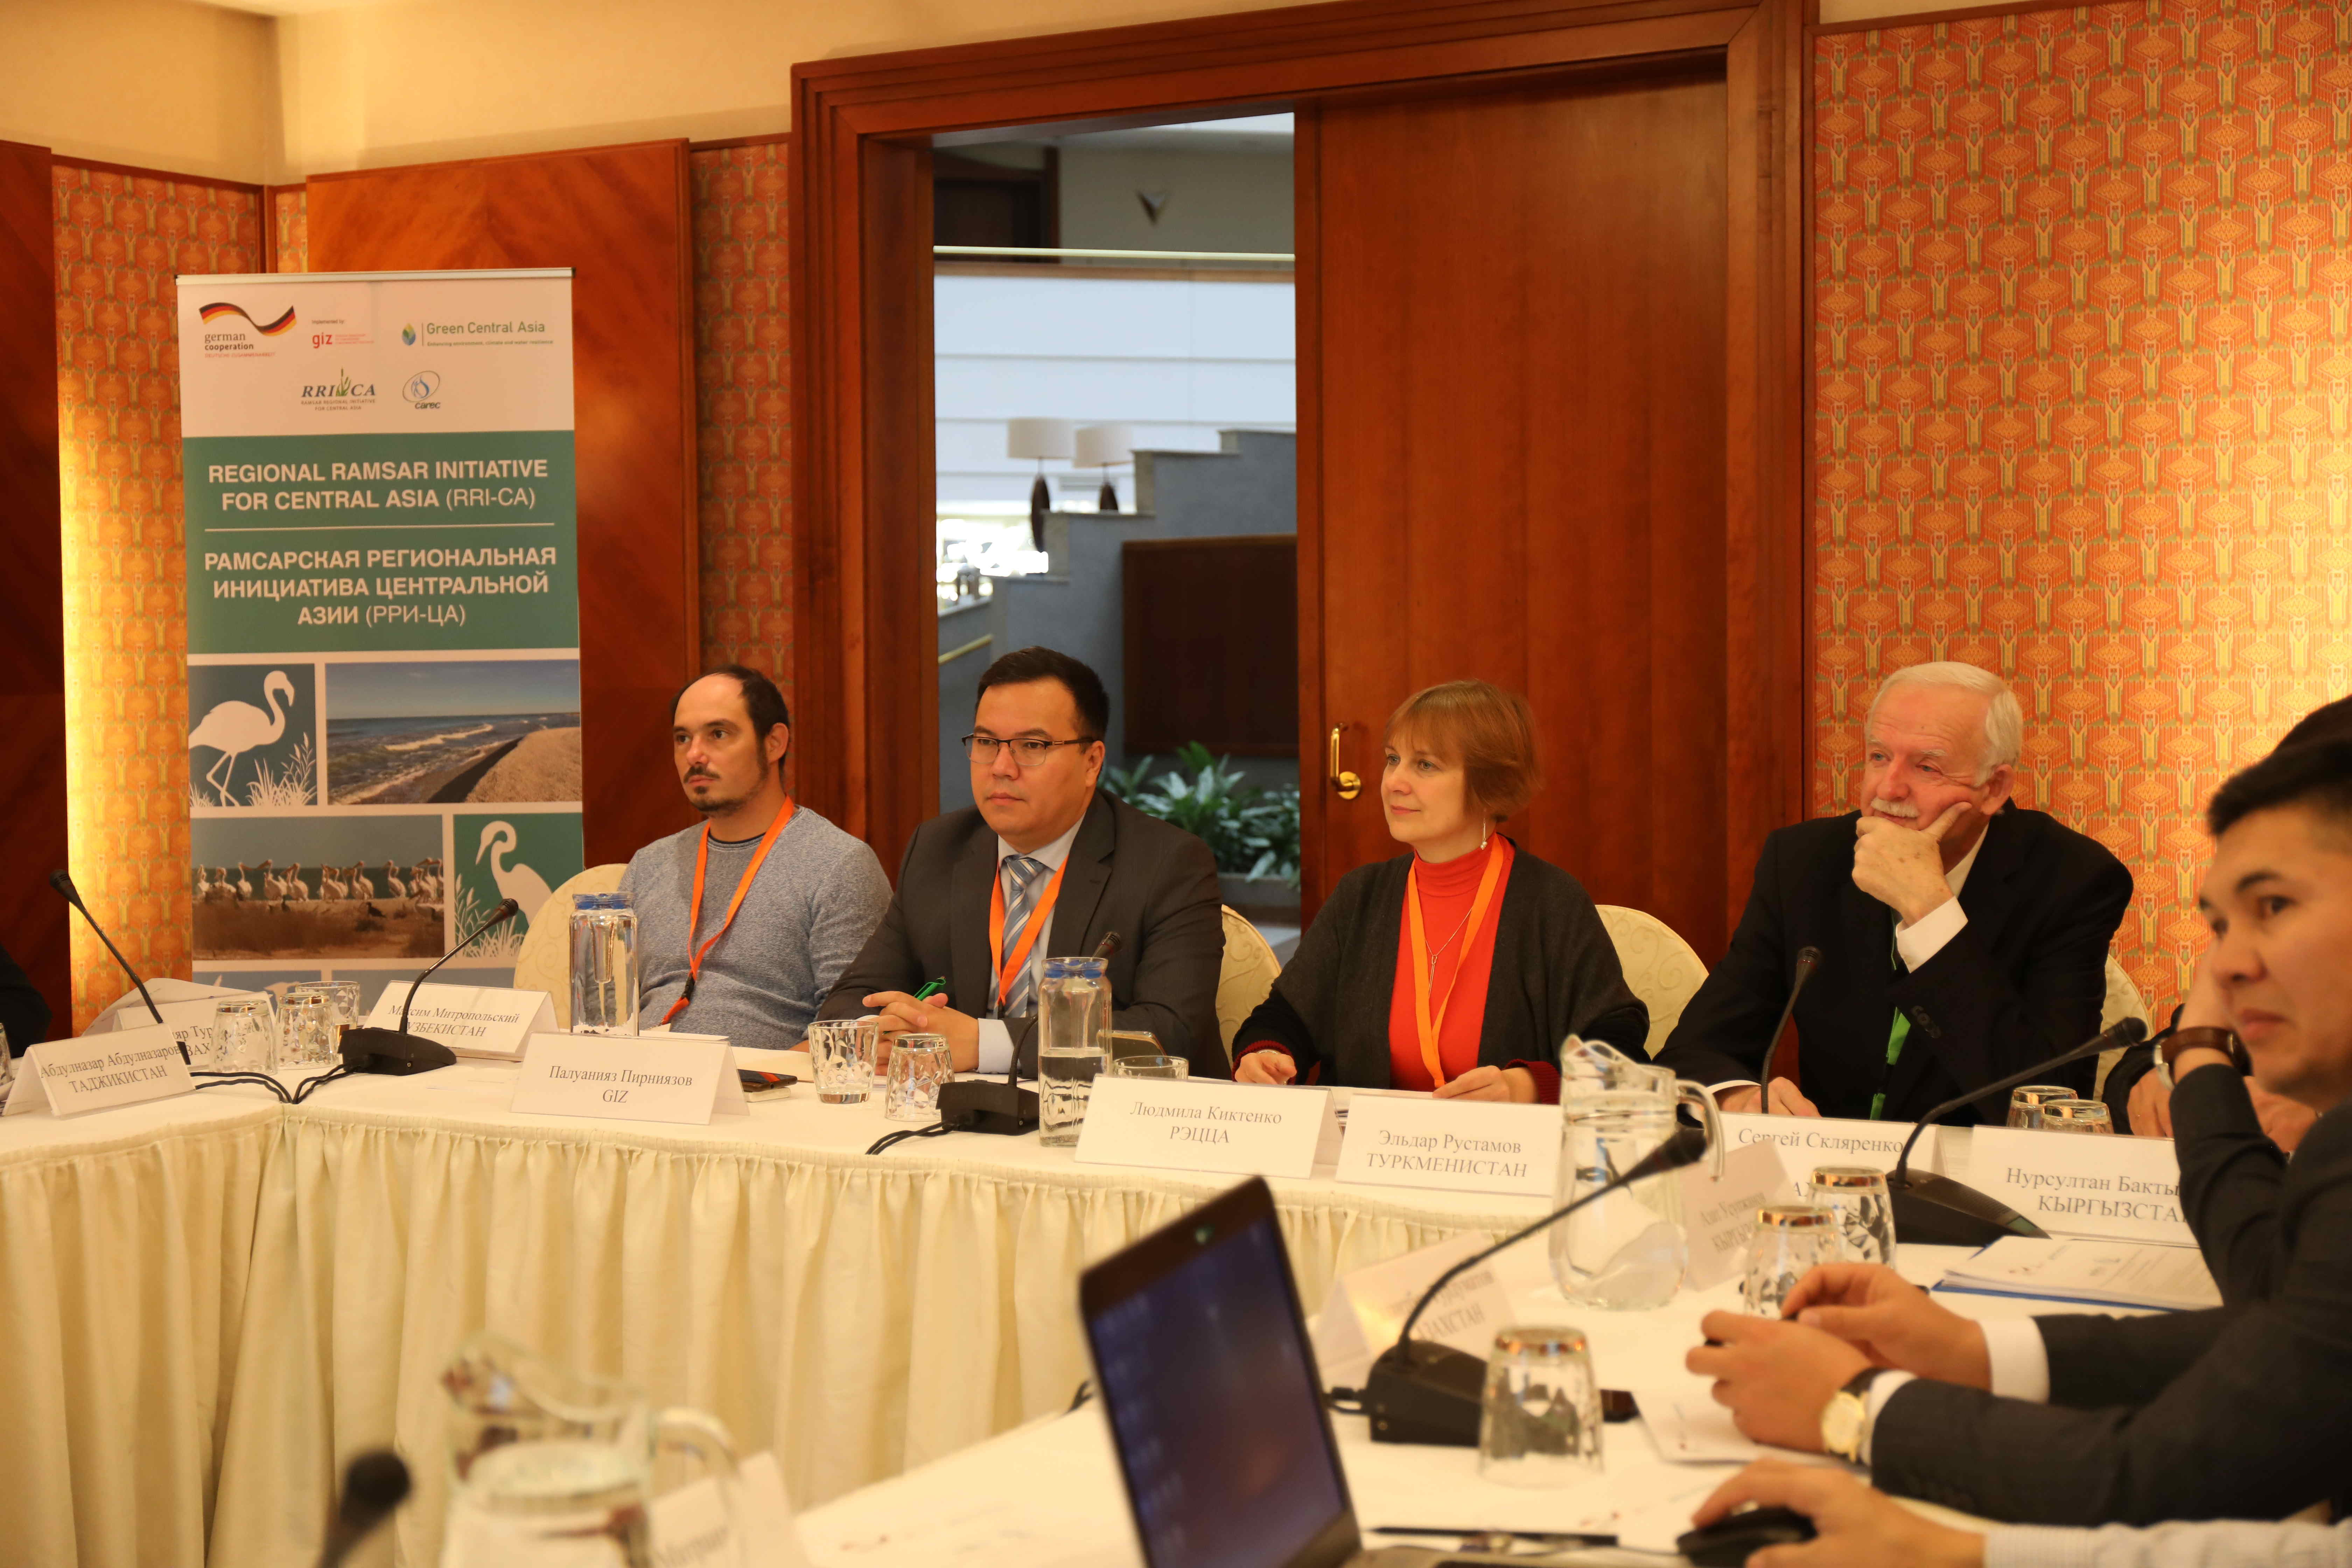 Members of the Regional Ramsar Initiative in Central Asia summed up the results of the year